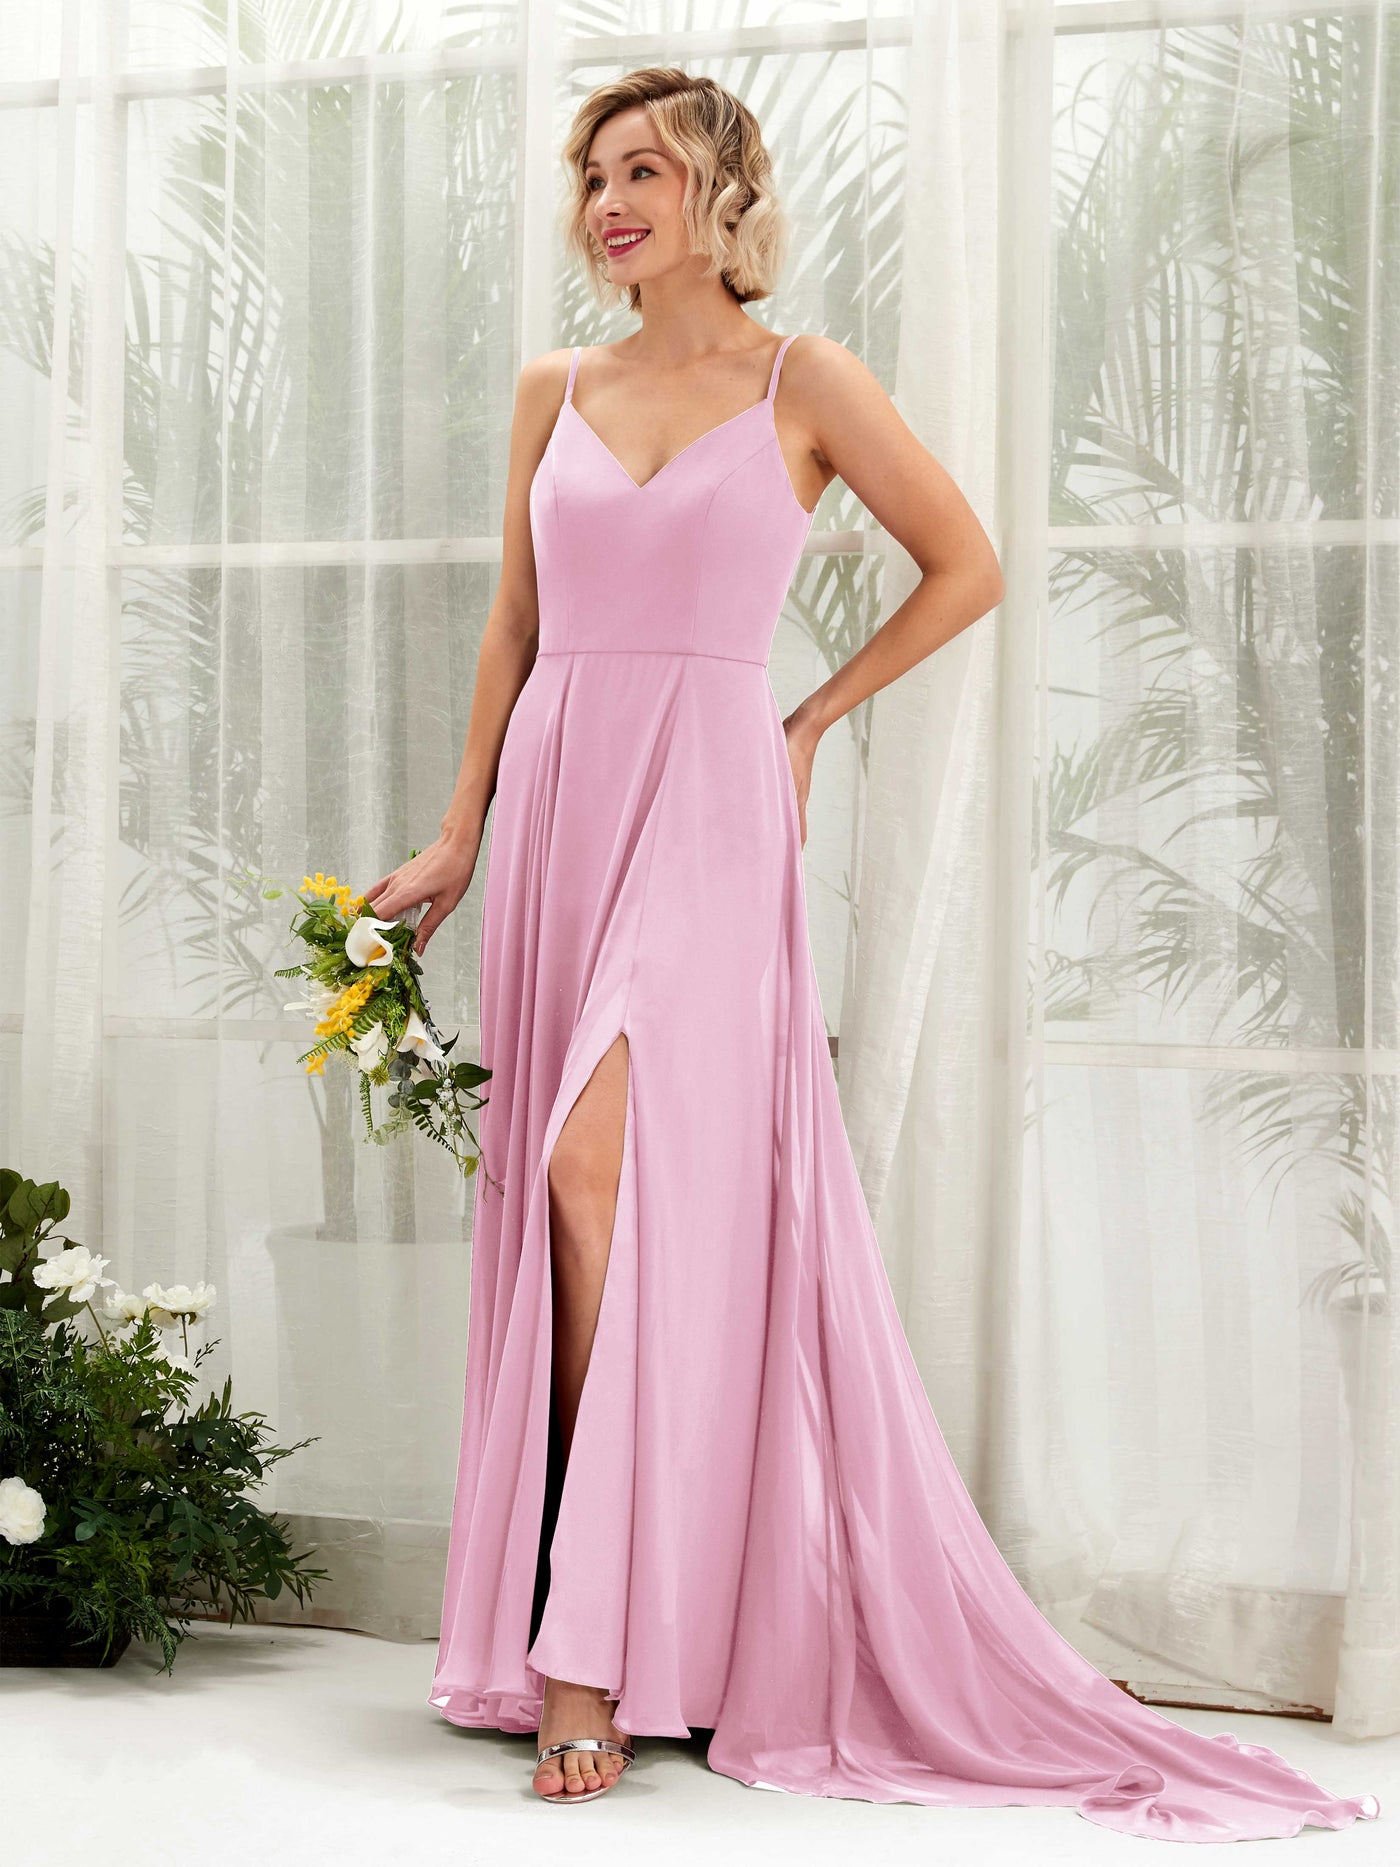 Candy Pink Bridesmaid Dresses Bridesmaid Dress A-line Chiffon V-neck Full Length Sleeveless Wedding Party Dress (81224139)#color_candy-pink